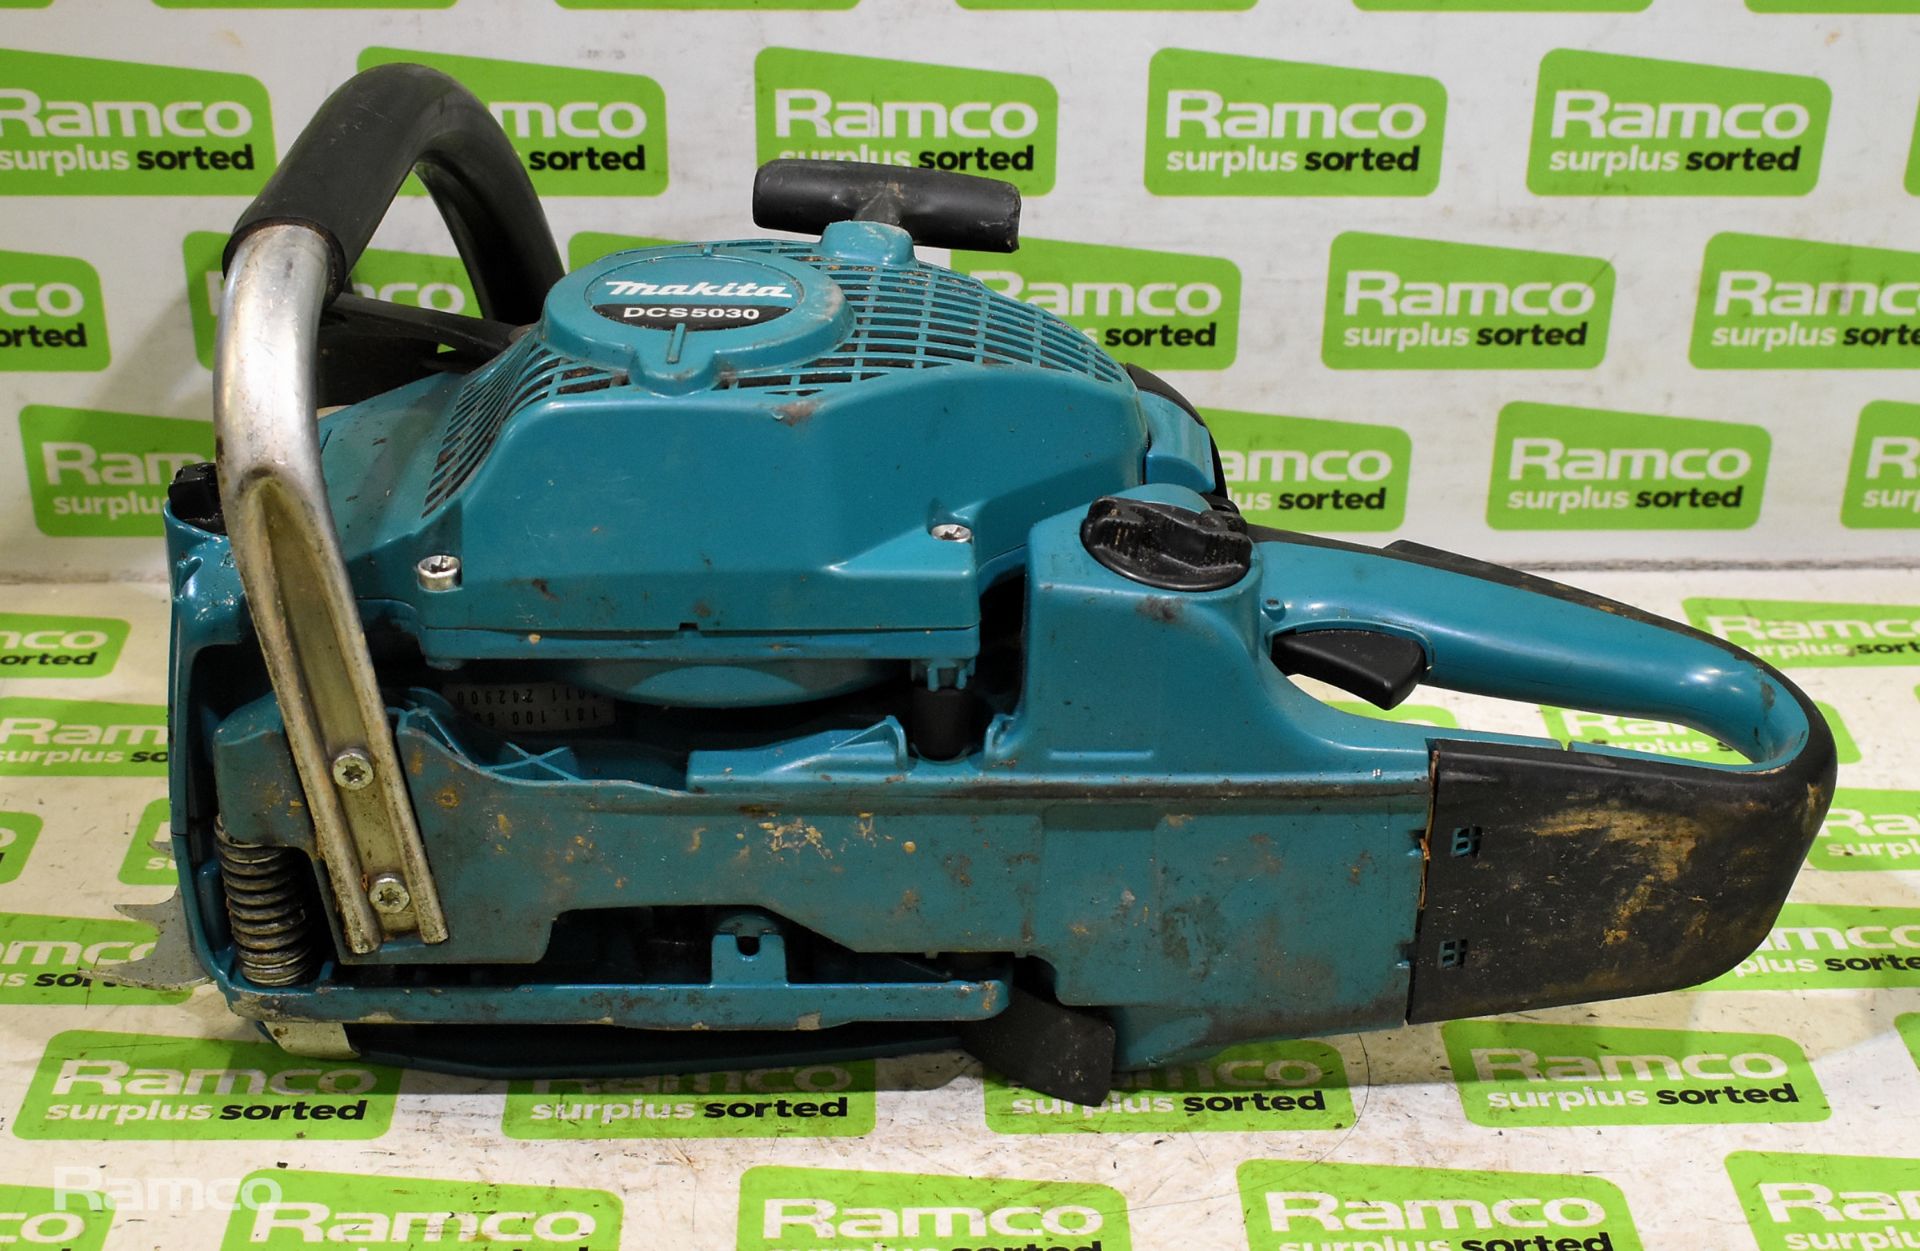 6x Makita DCS5030 50cc petrol chainsaw - BODIES ONLY - AS SPARES & REPAIRS - Image 18 of 33